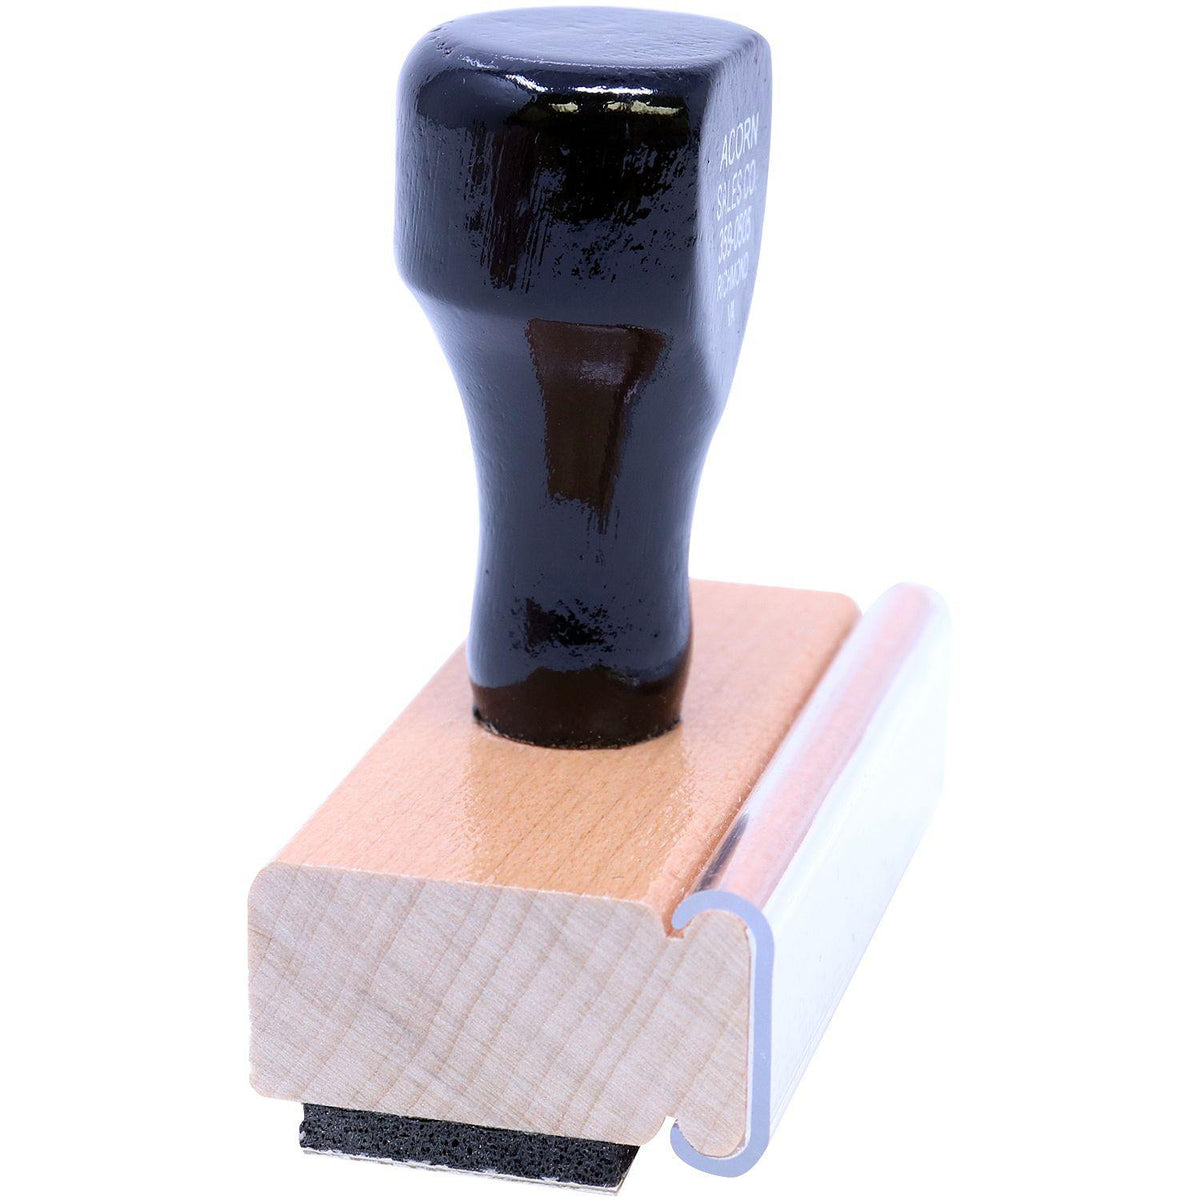 Side View of Deposition Exhibit Rubber Stamp at an Angle